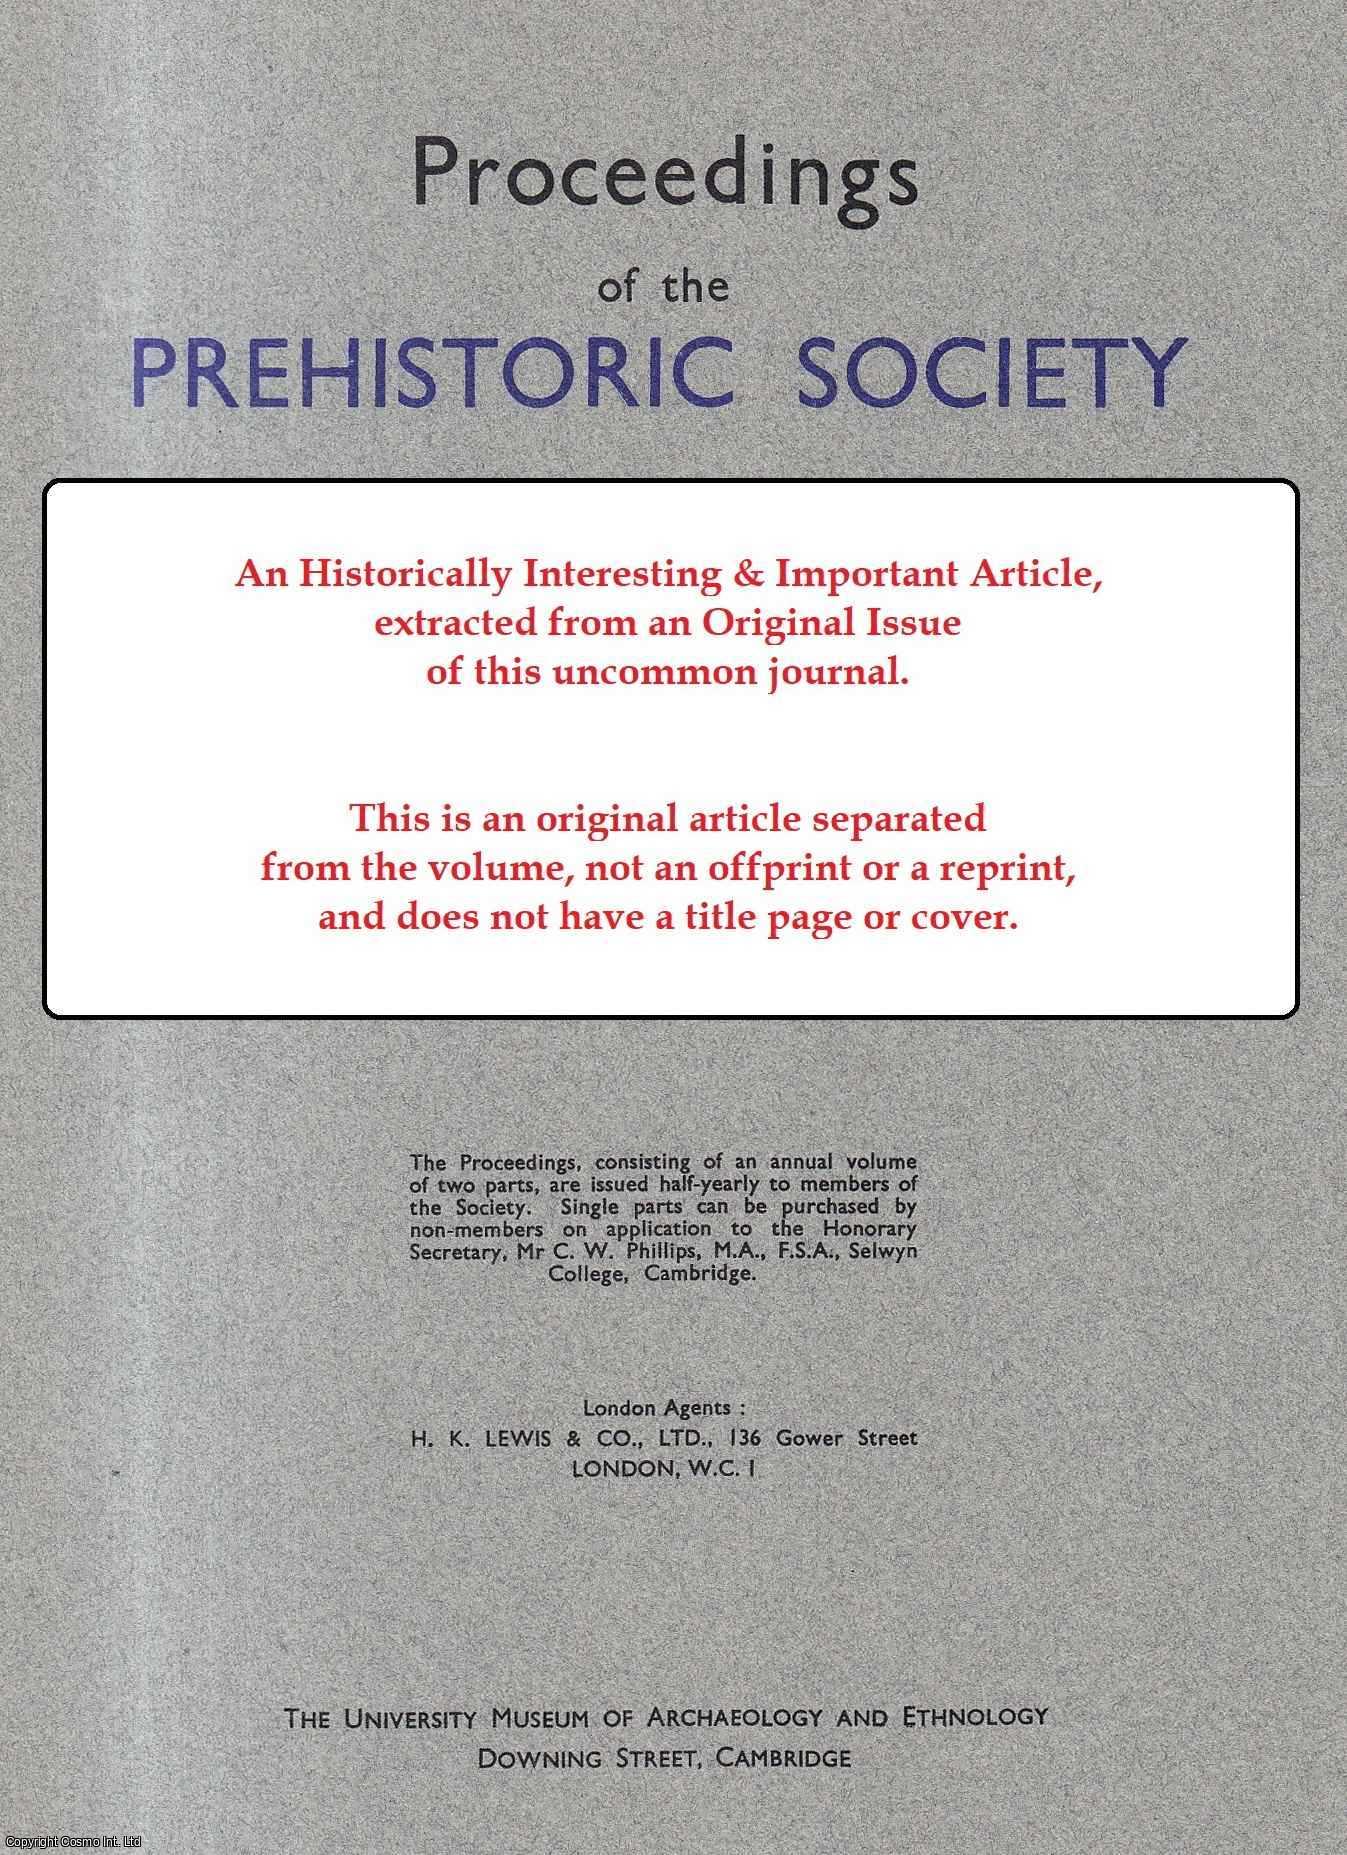 Alfred S. Barnes - The Technique of Blade Production in Mesolithic and Neolithic Times. An original article from Proceedings of the Prehistoric Society, 1947.